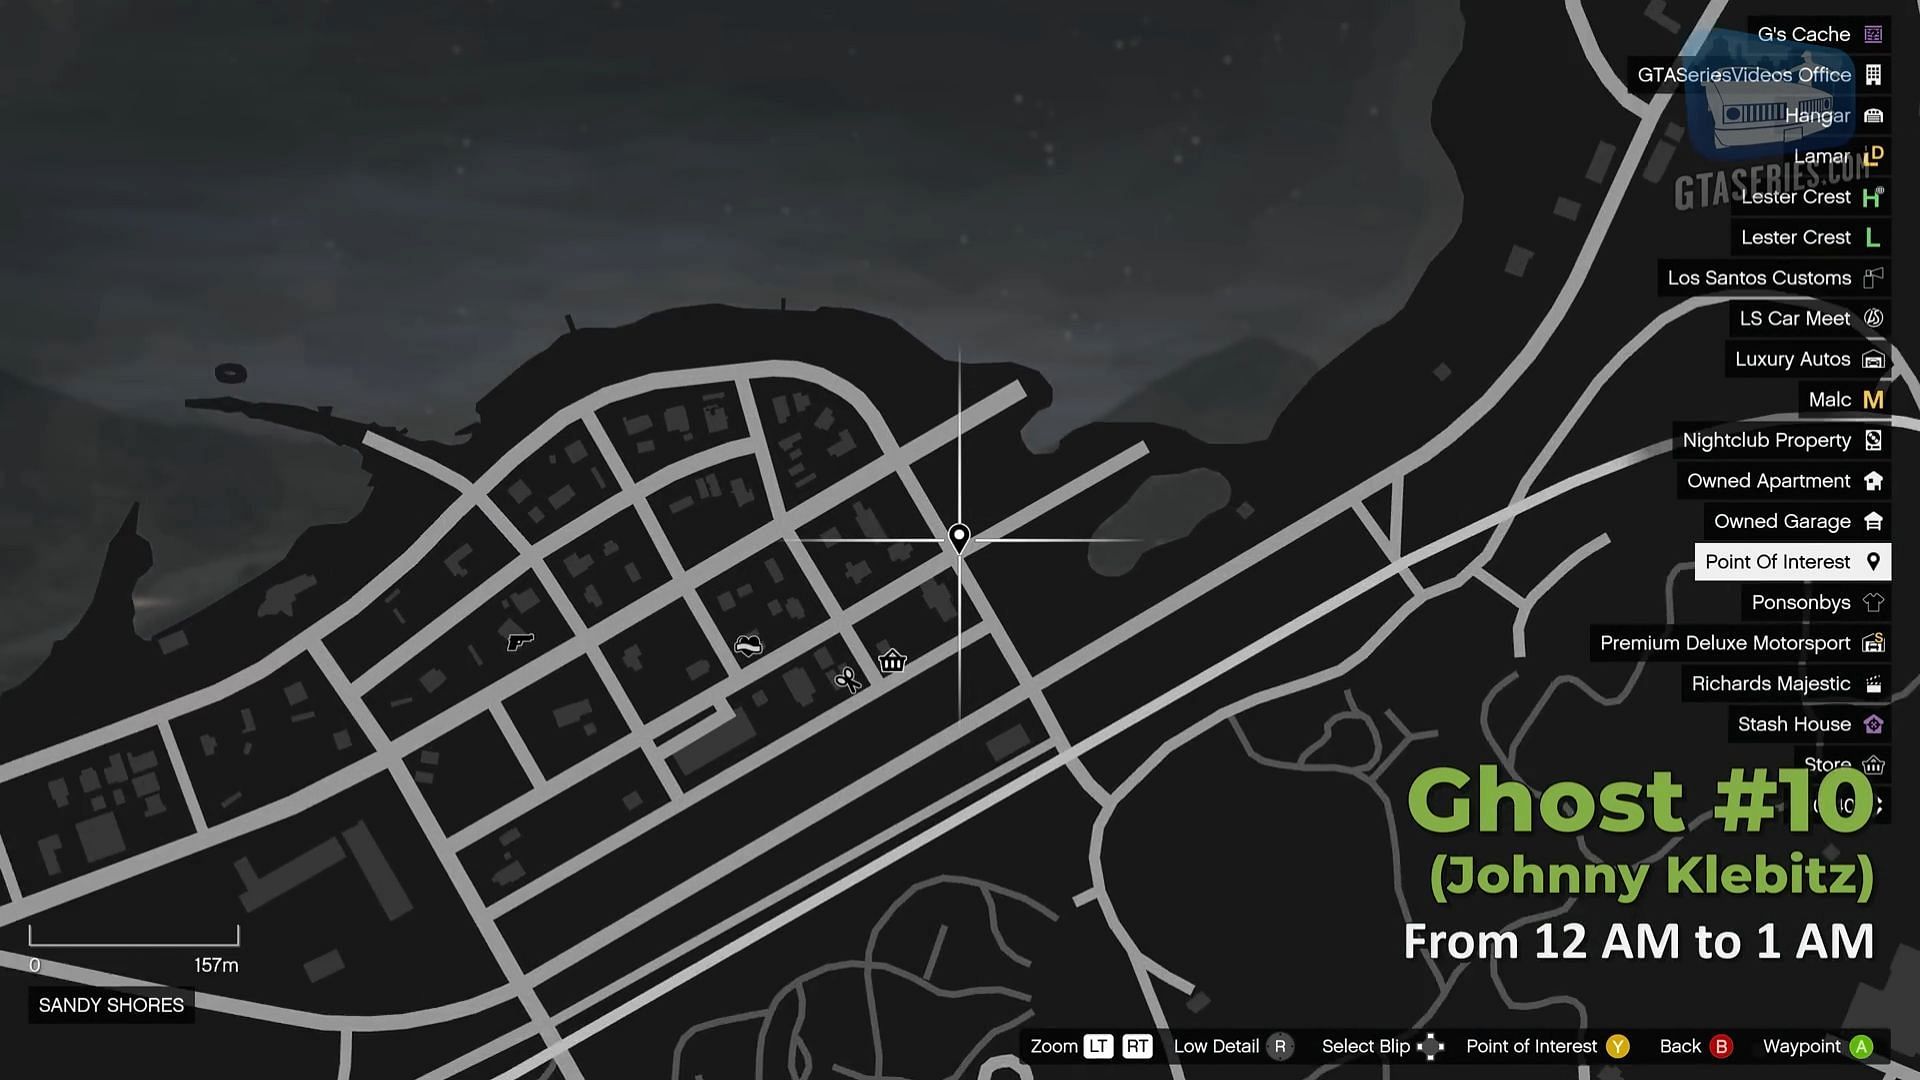 The spawn location of the tenth ghost (Image via YouTube)